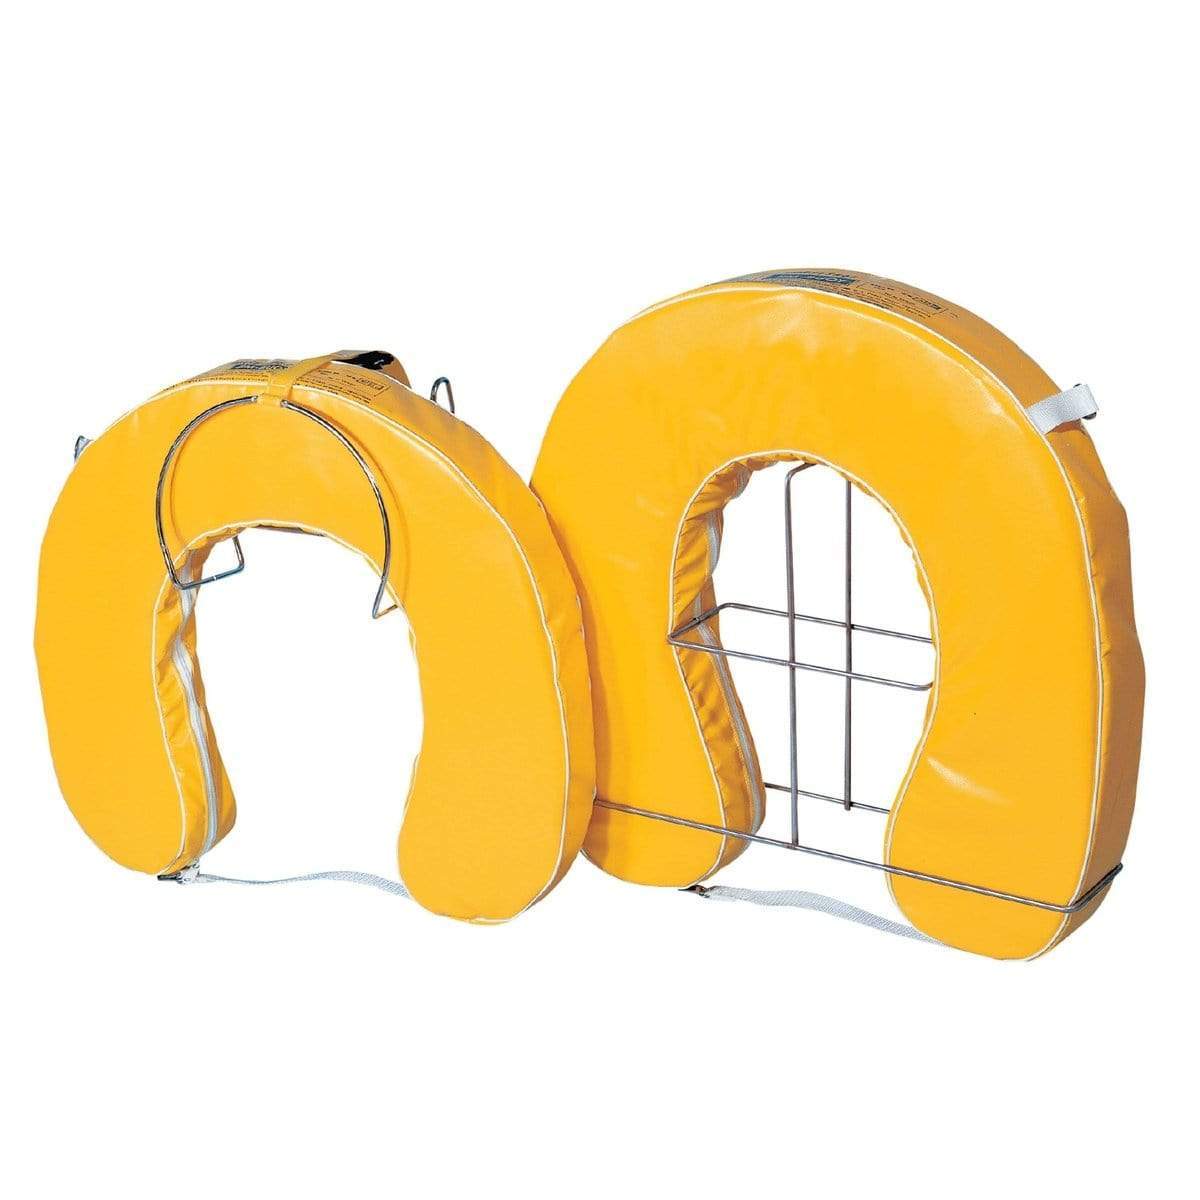 Cal-june Not Qualified for Free Shipping Cal-June Standard Horseshoe Buoy Yellow #920